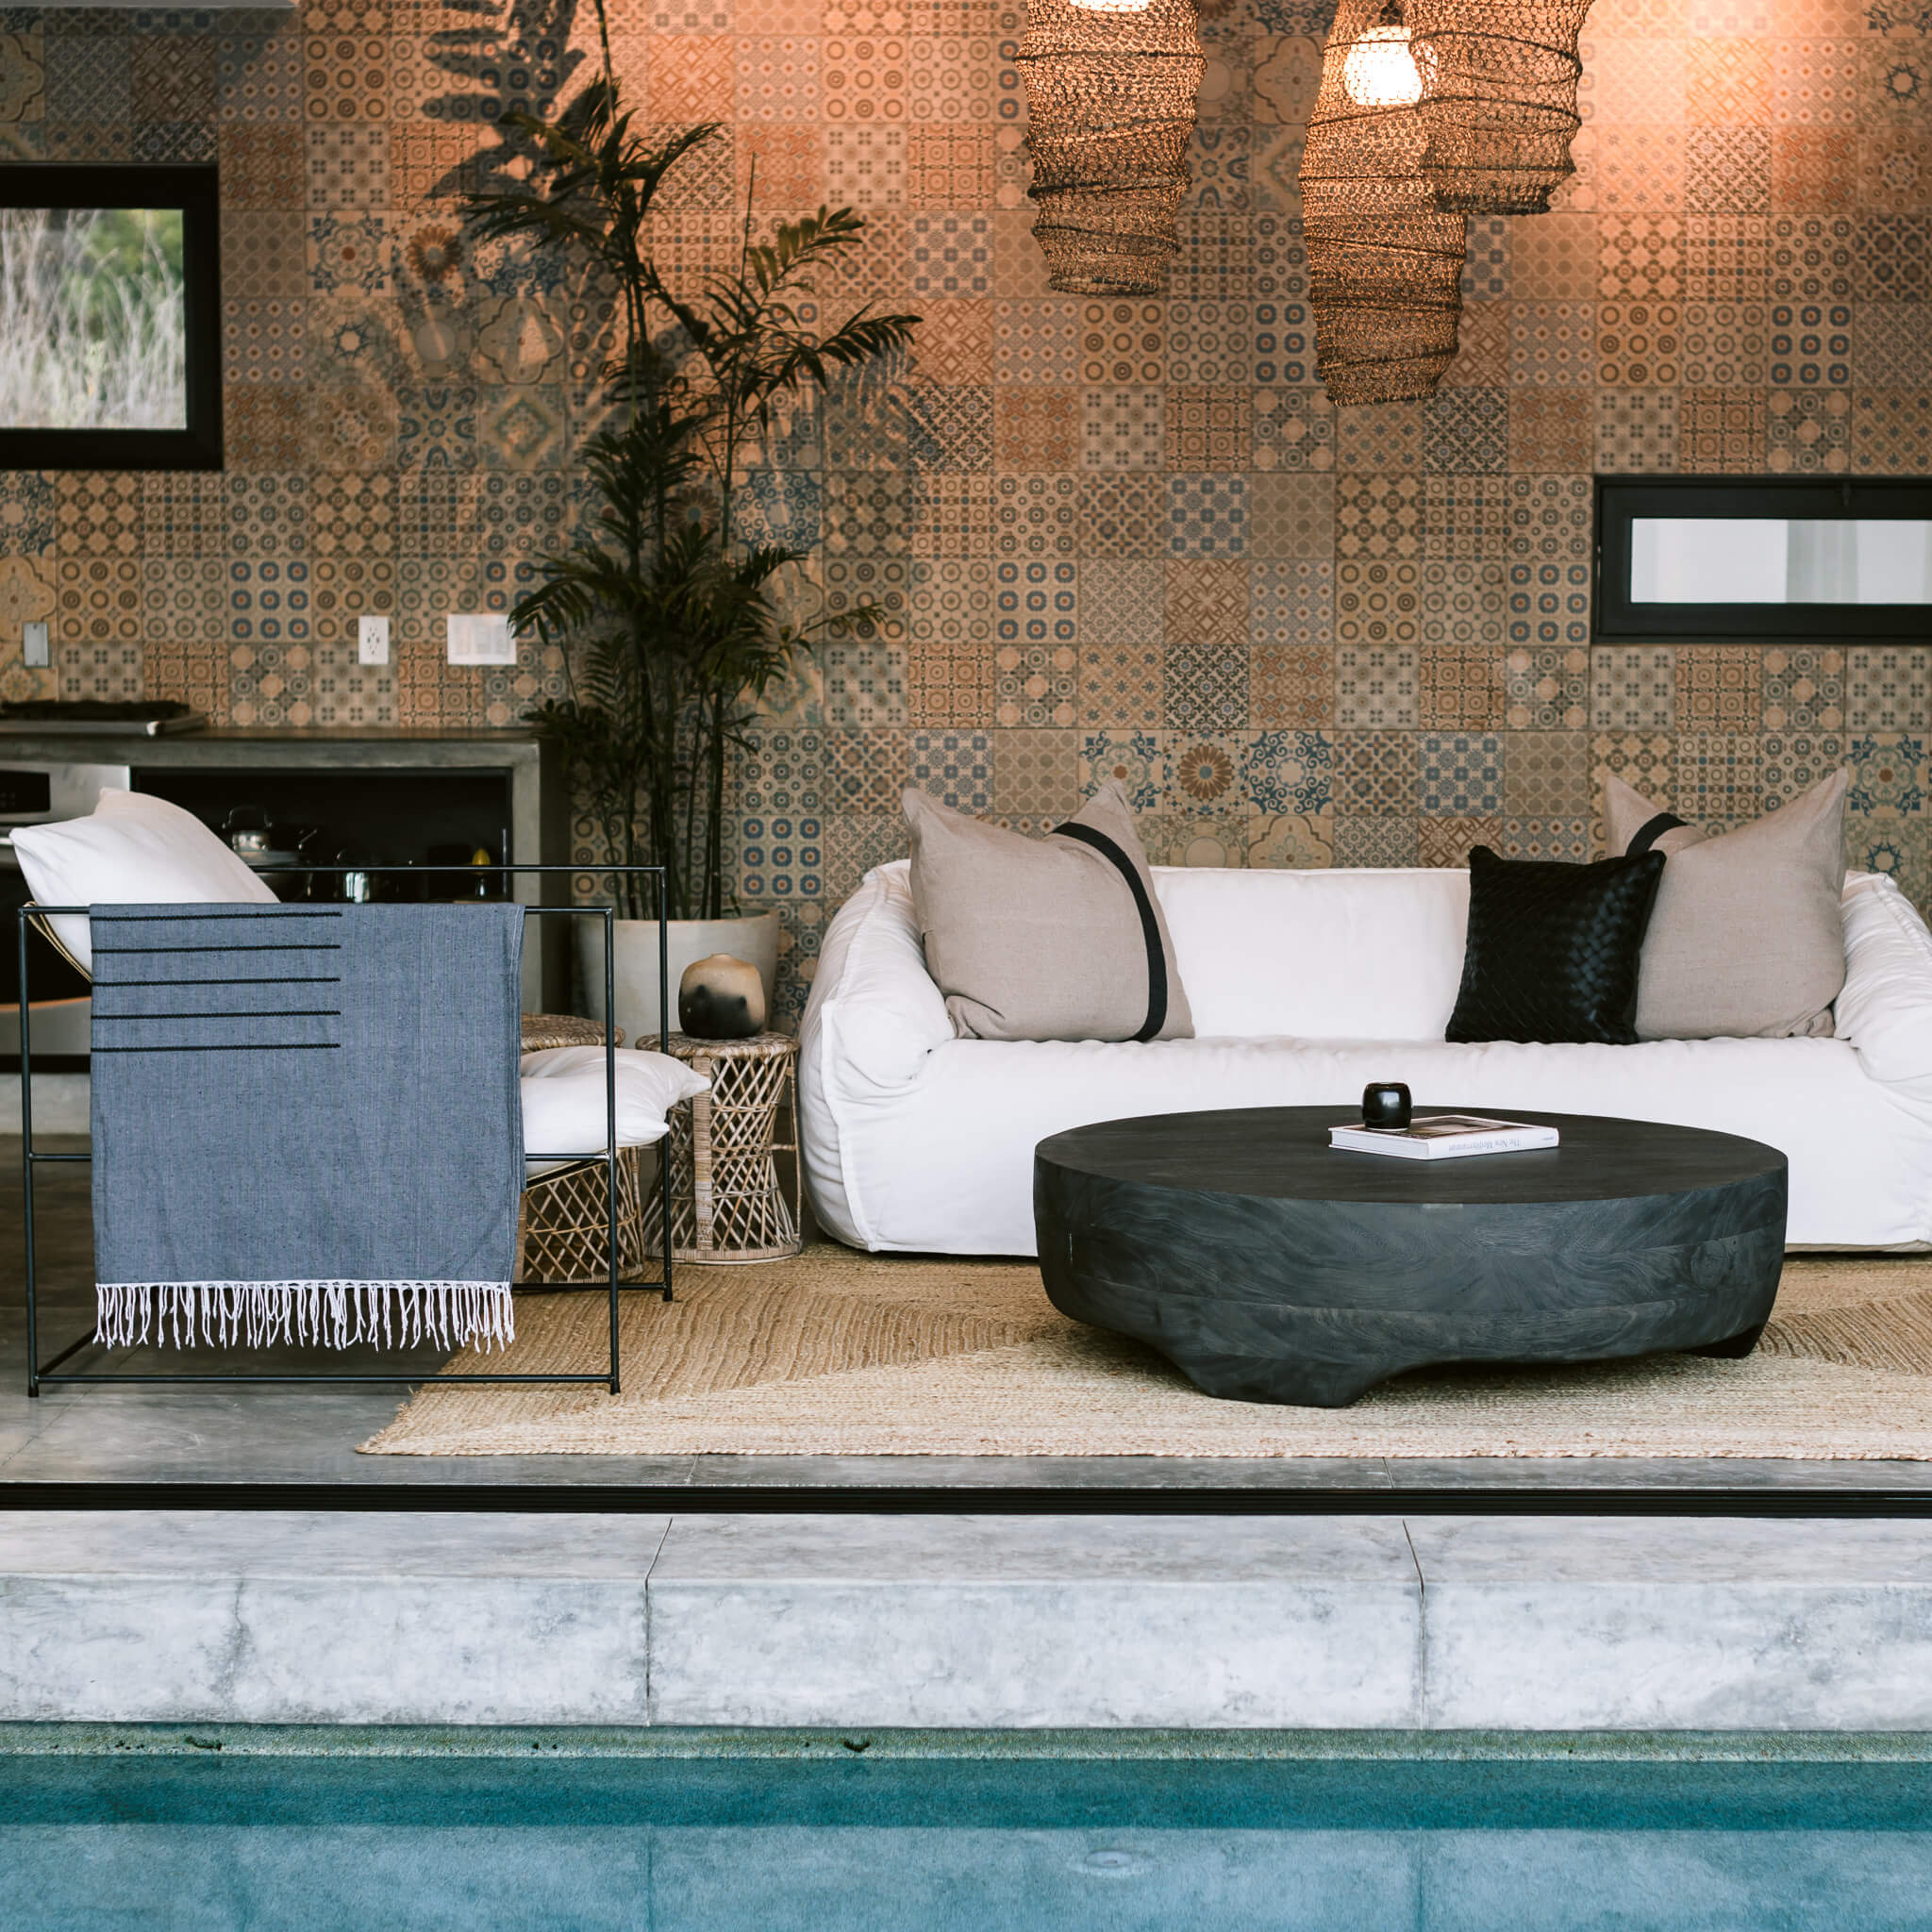 An open concept, Mediterranean-style home featuring doors leading to the pool, a white overstuffed couch and a tiled wall. A black braided throw pillow is arranged on the white couch.